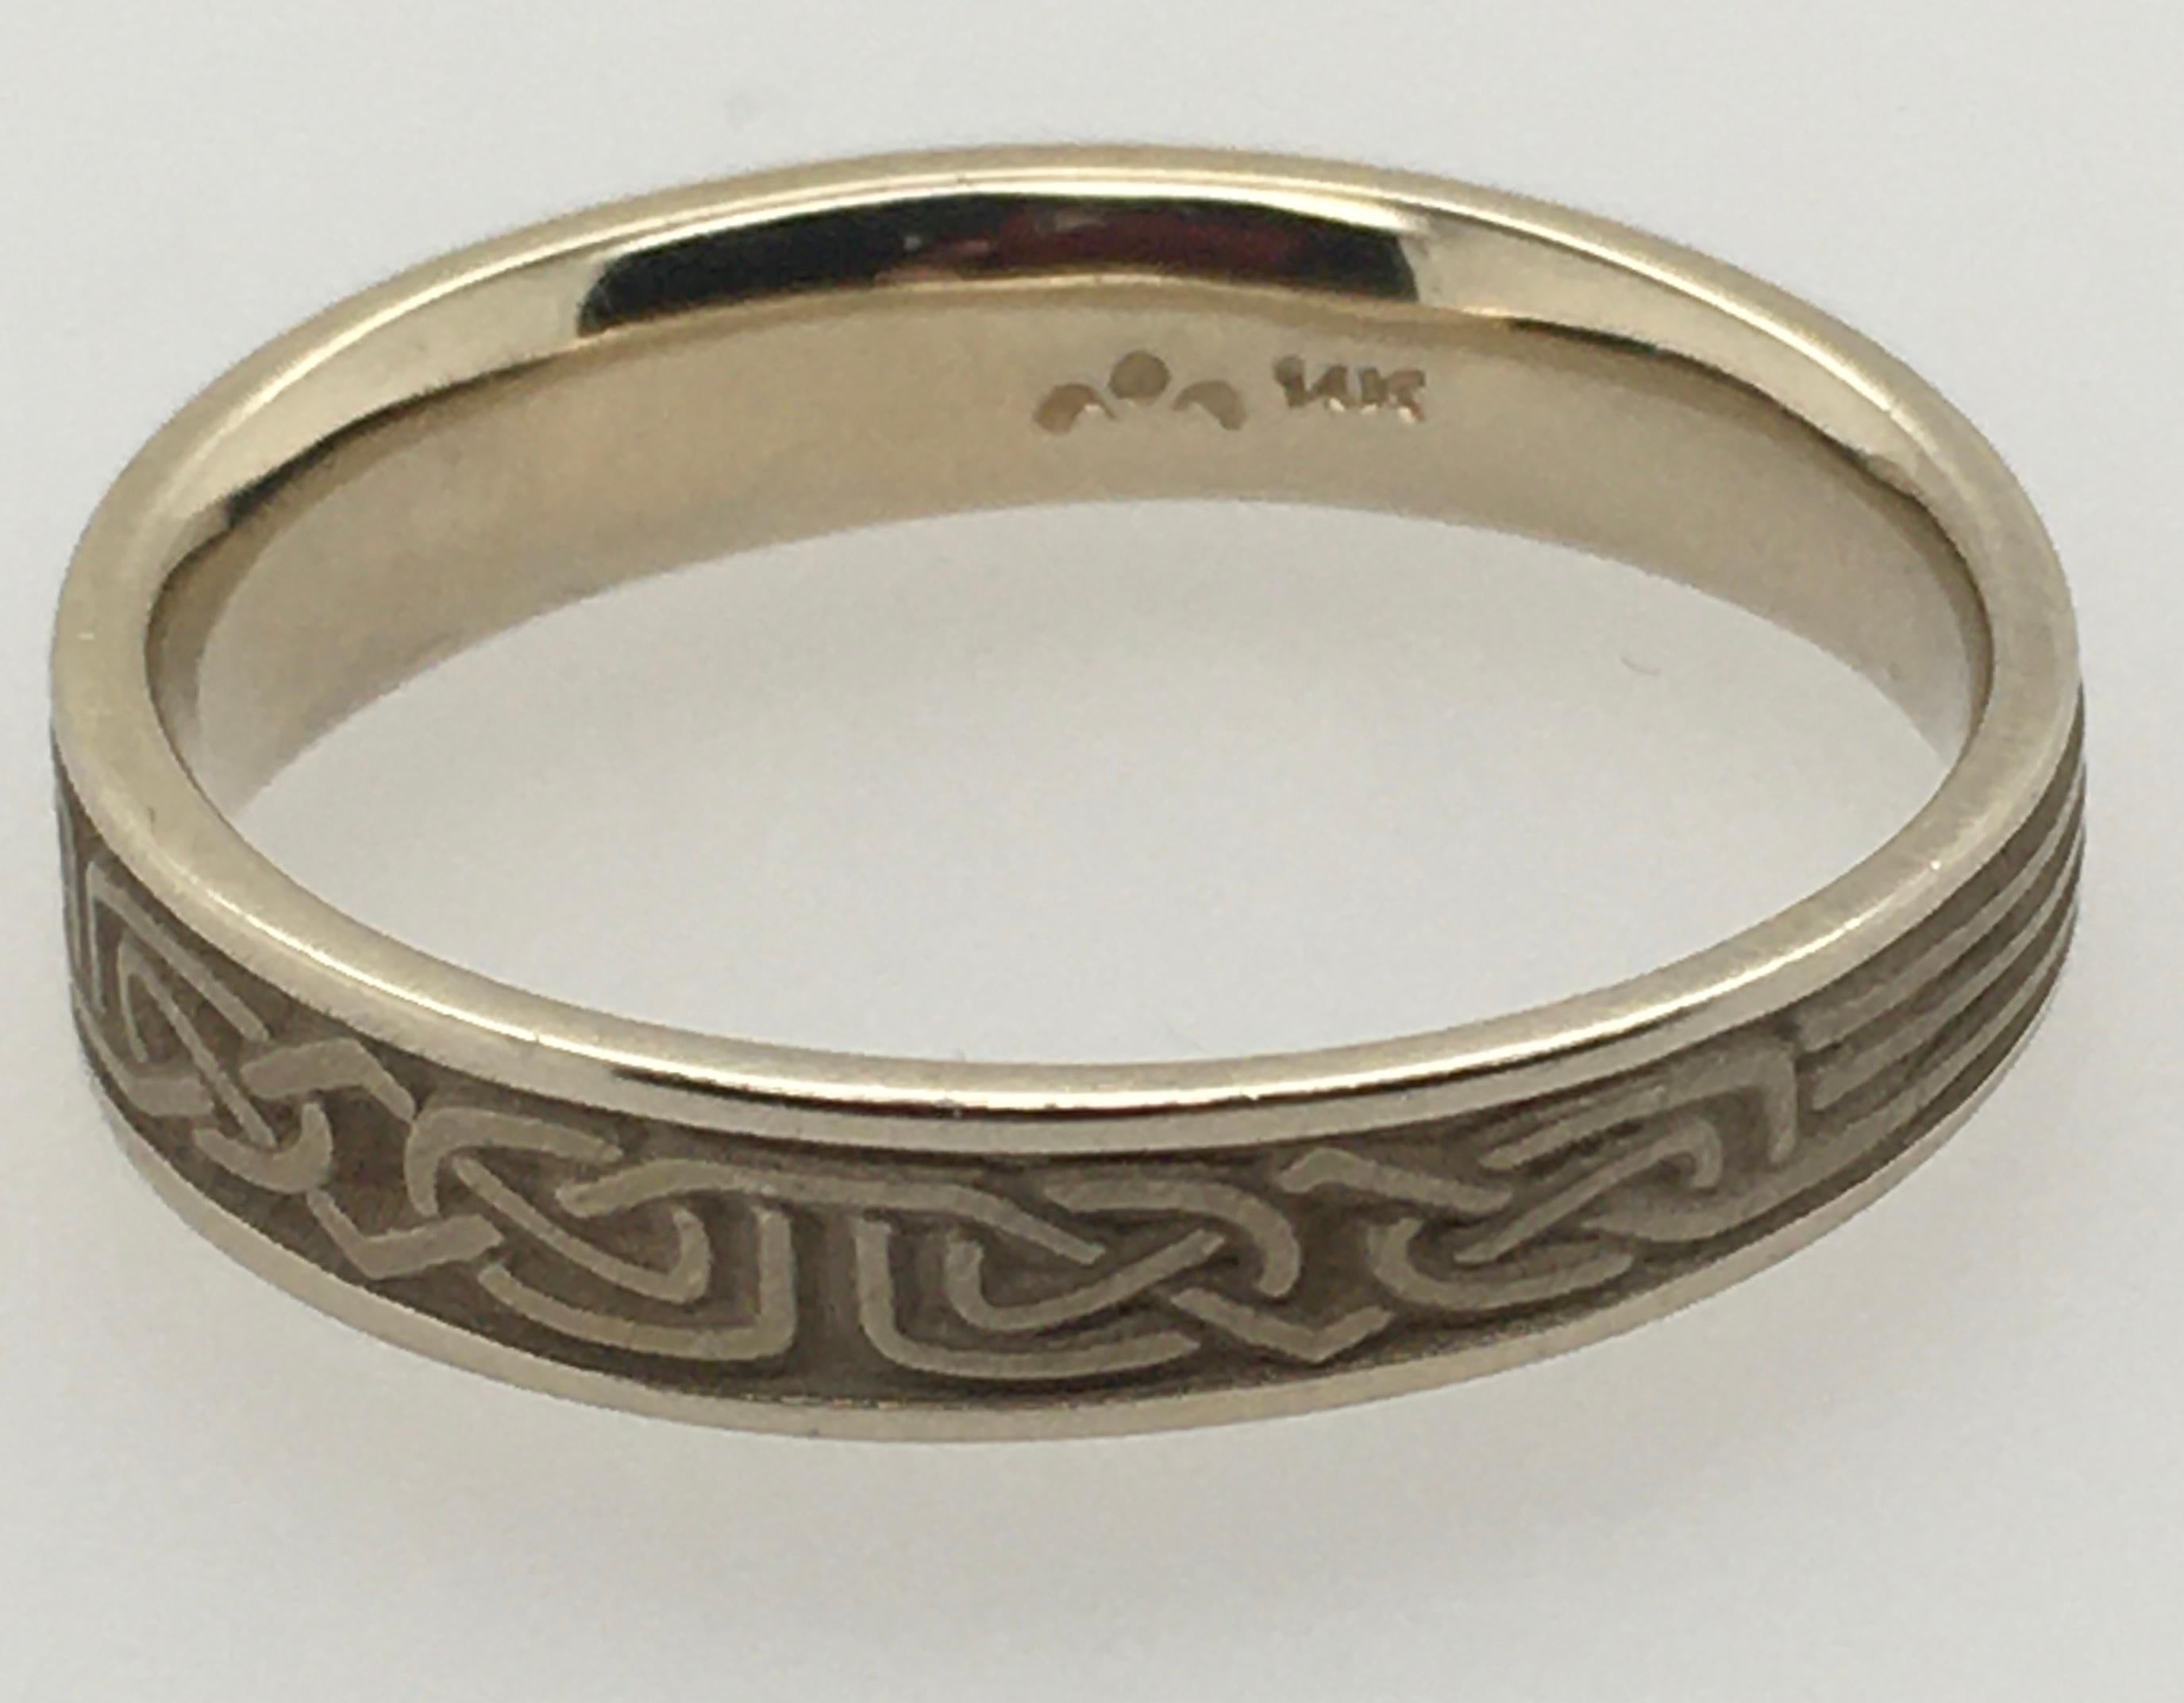 STUDIO 311 Extra Narrow Border Labyrinth White Gold Men's Wedding Band  In Excellent Condition For Sale In Kennebunkport, ME